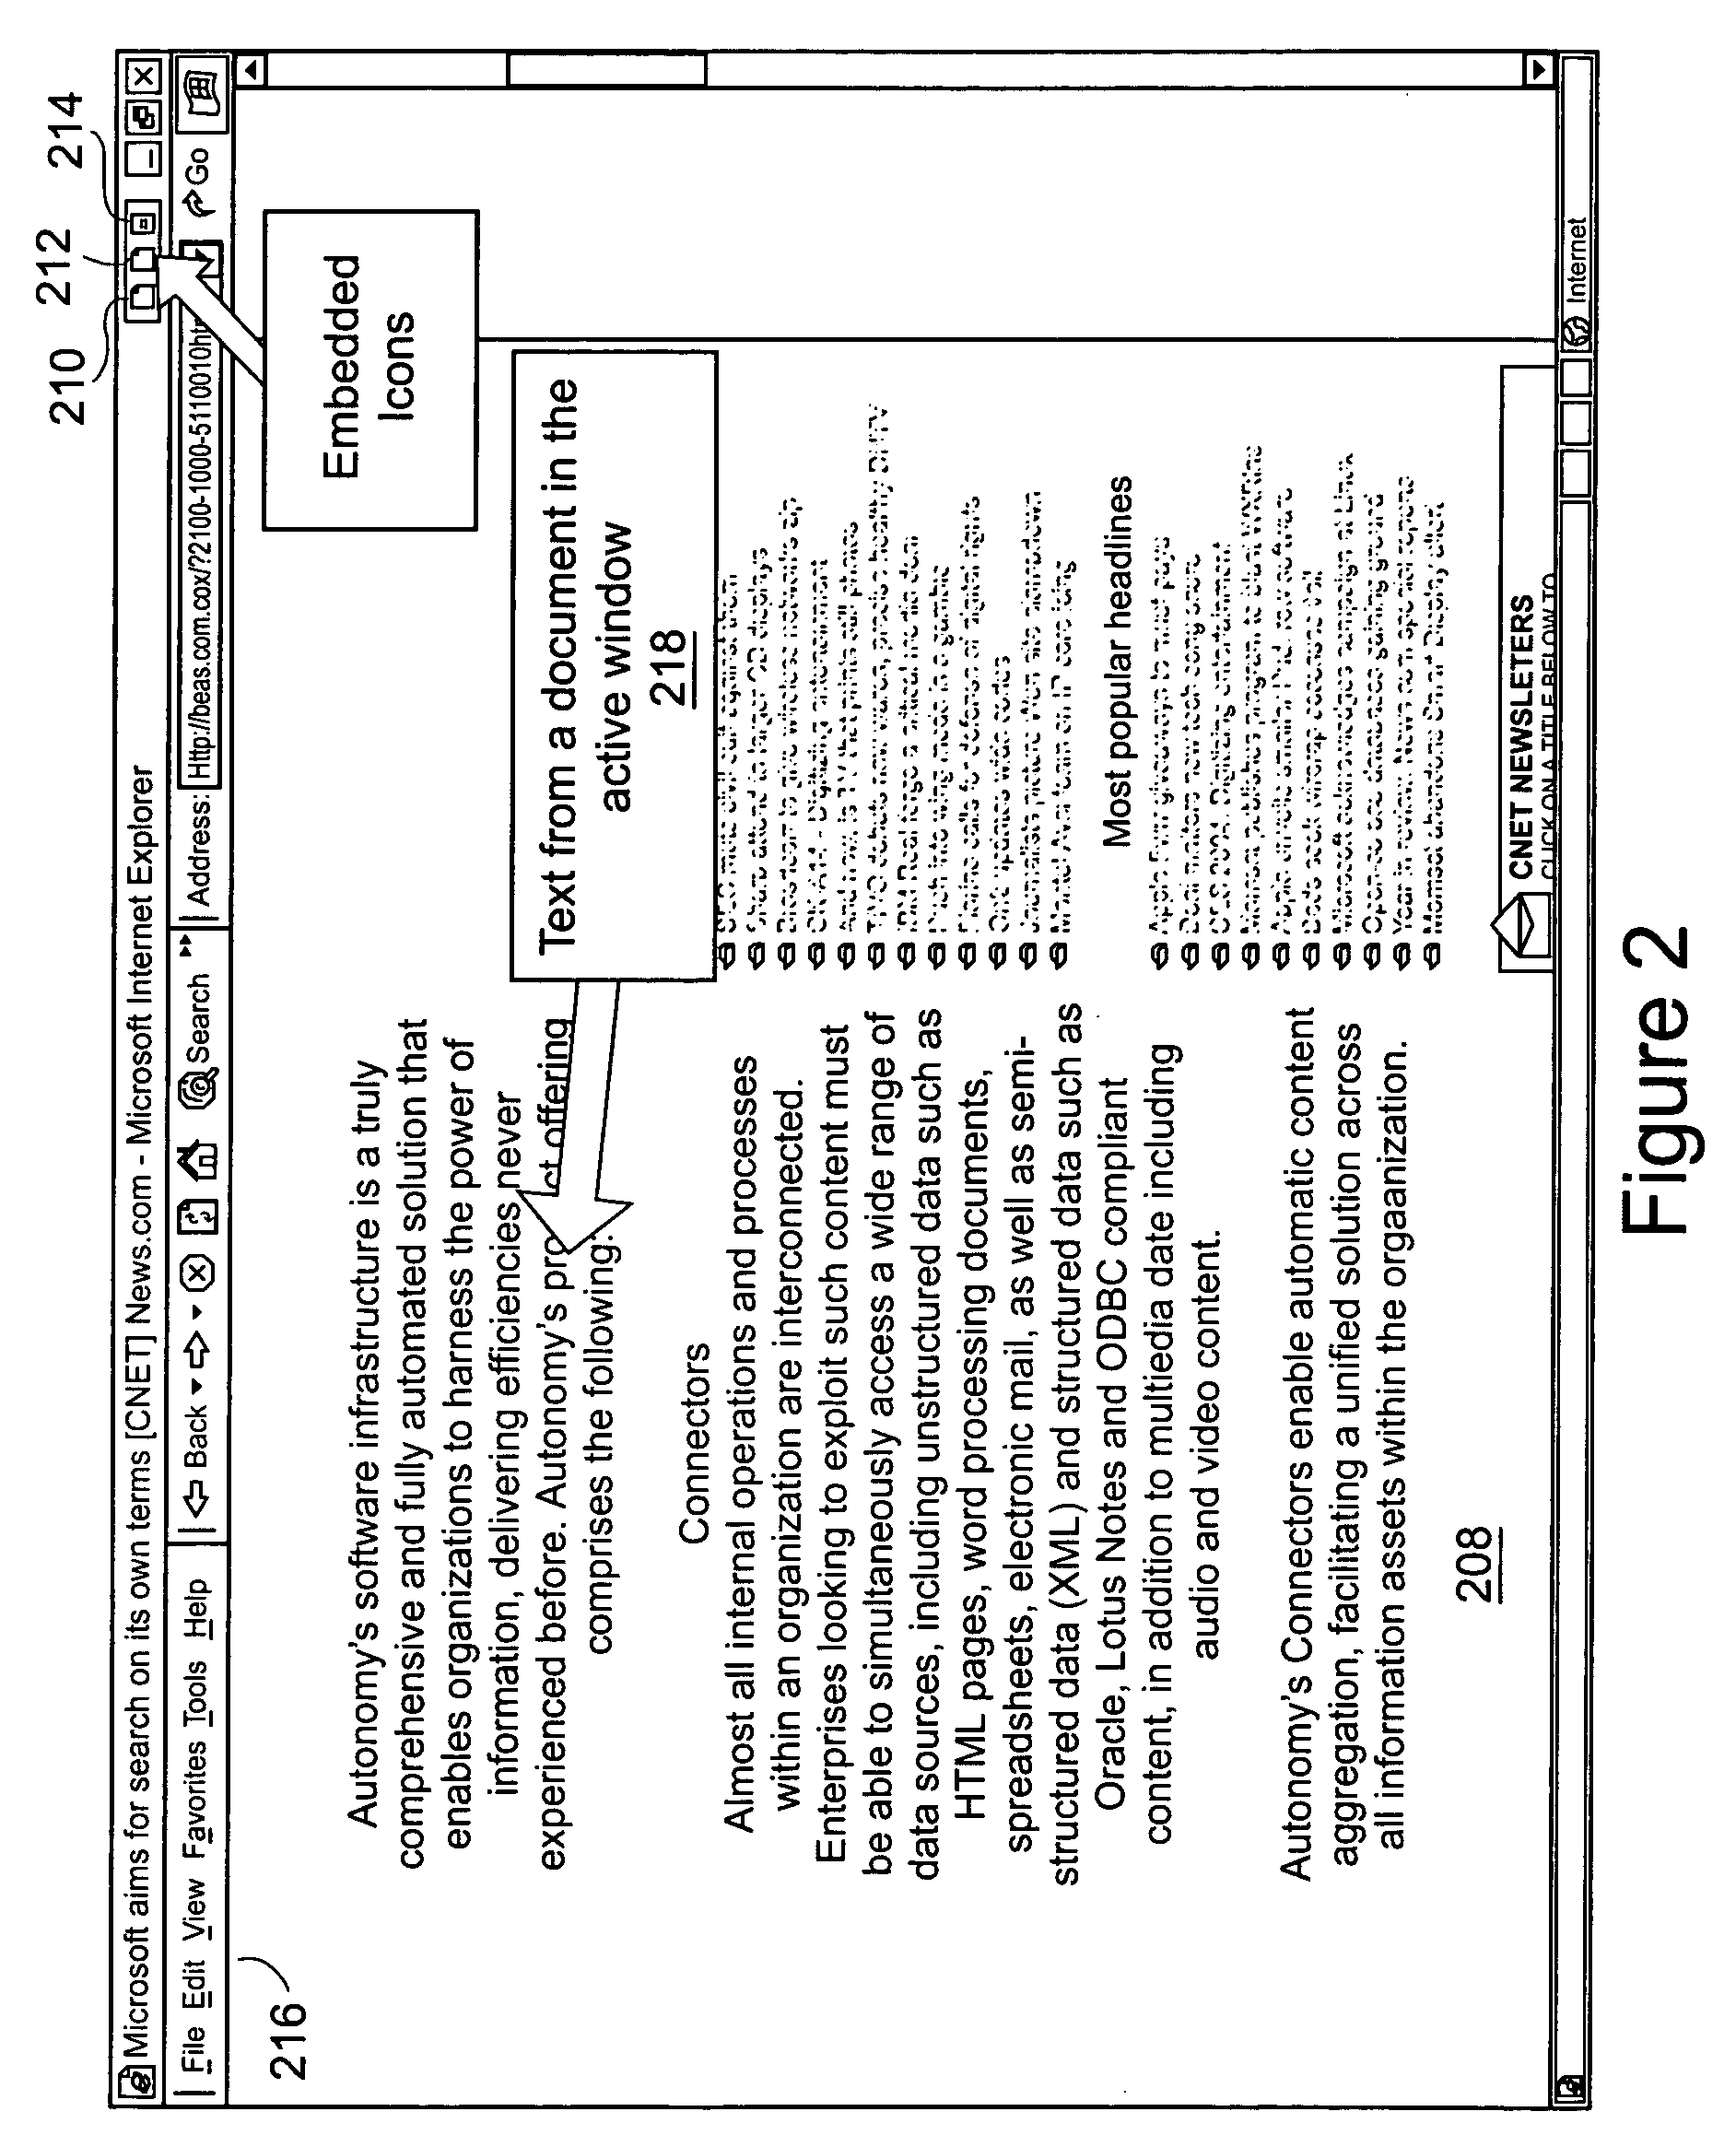 Methods and apparatuses to generate links from content in an active window